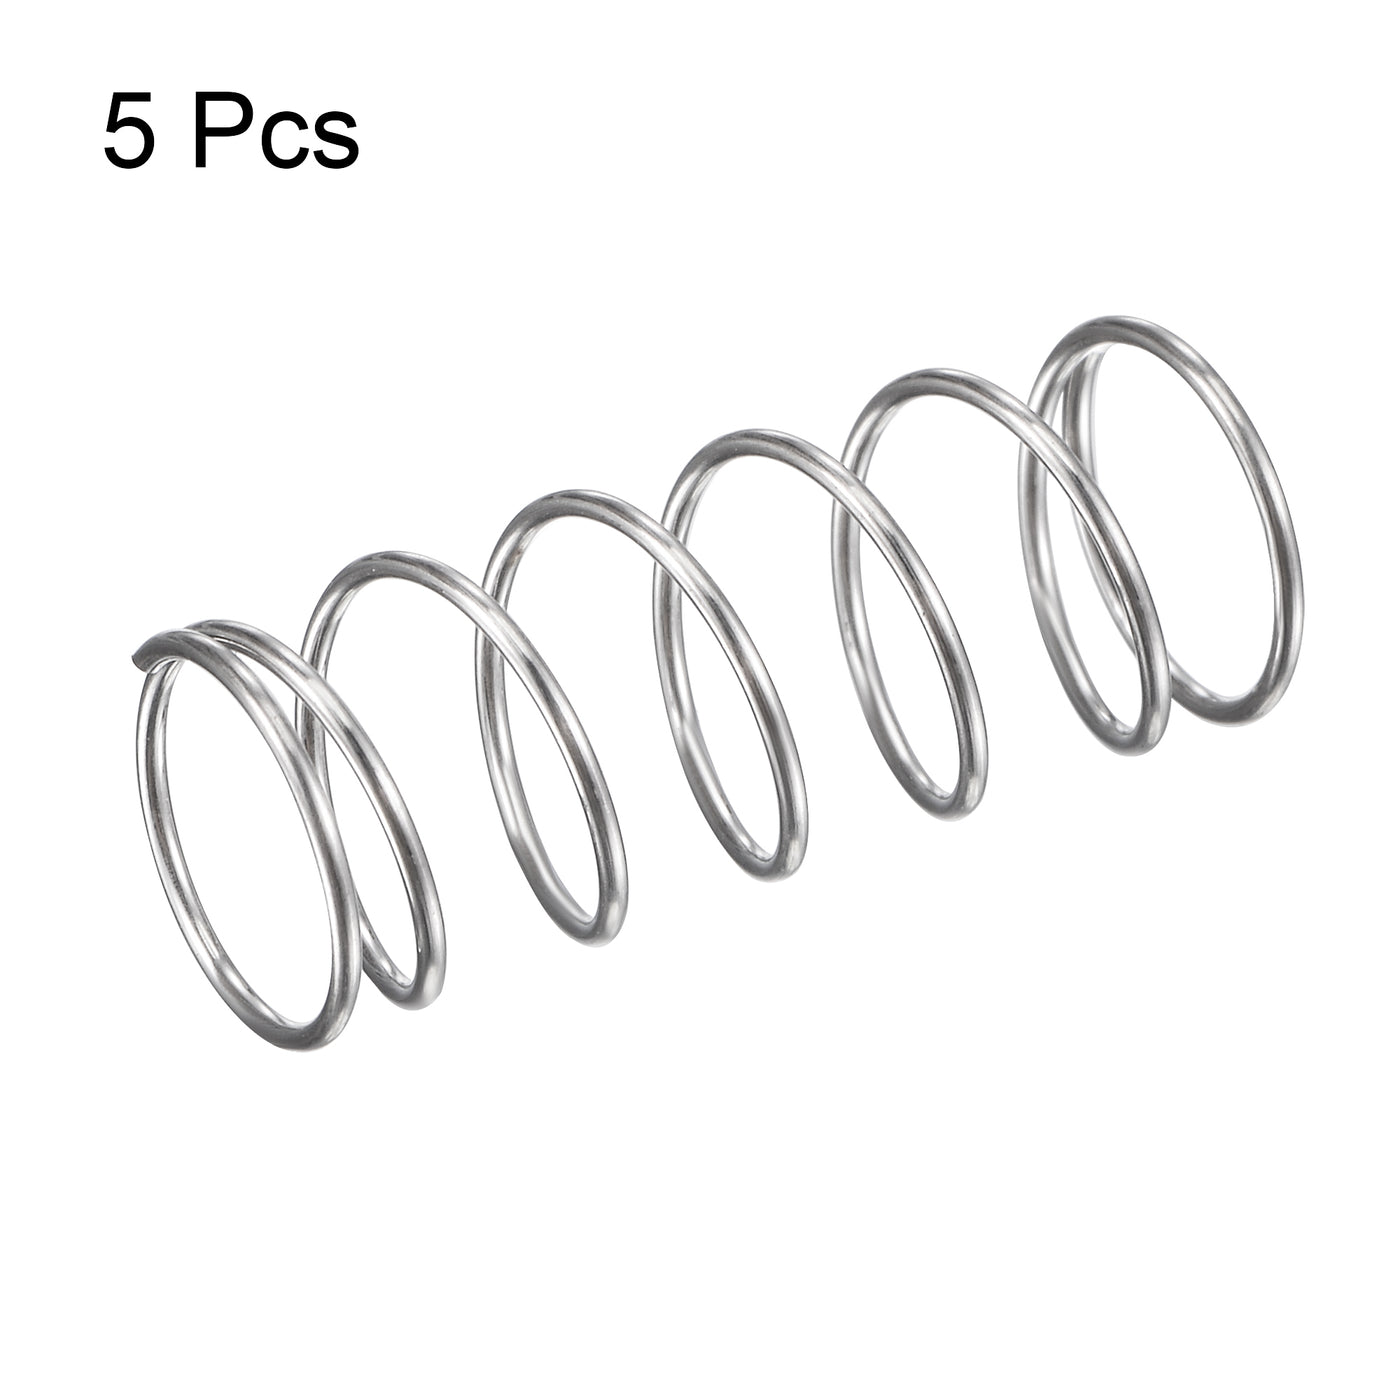 uxcell Uxcell 10mmx0.7mmx25mm 304 Stainless Steel Compression Spring 11.8N Load Capacity 5pcs